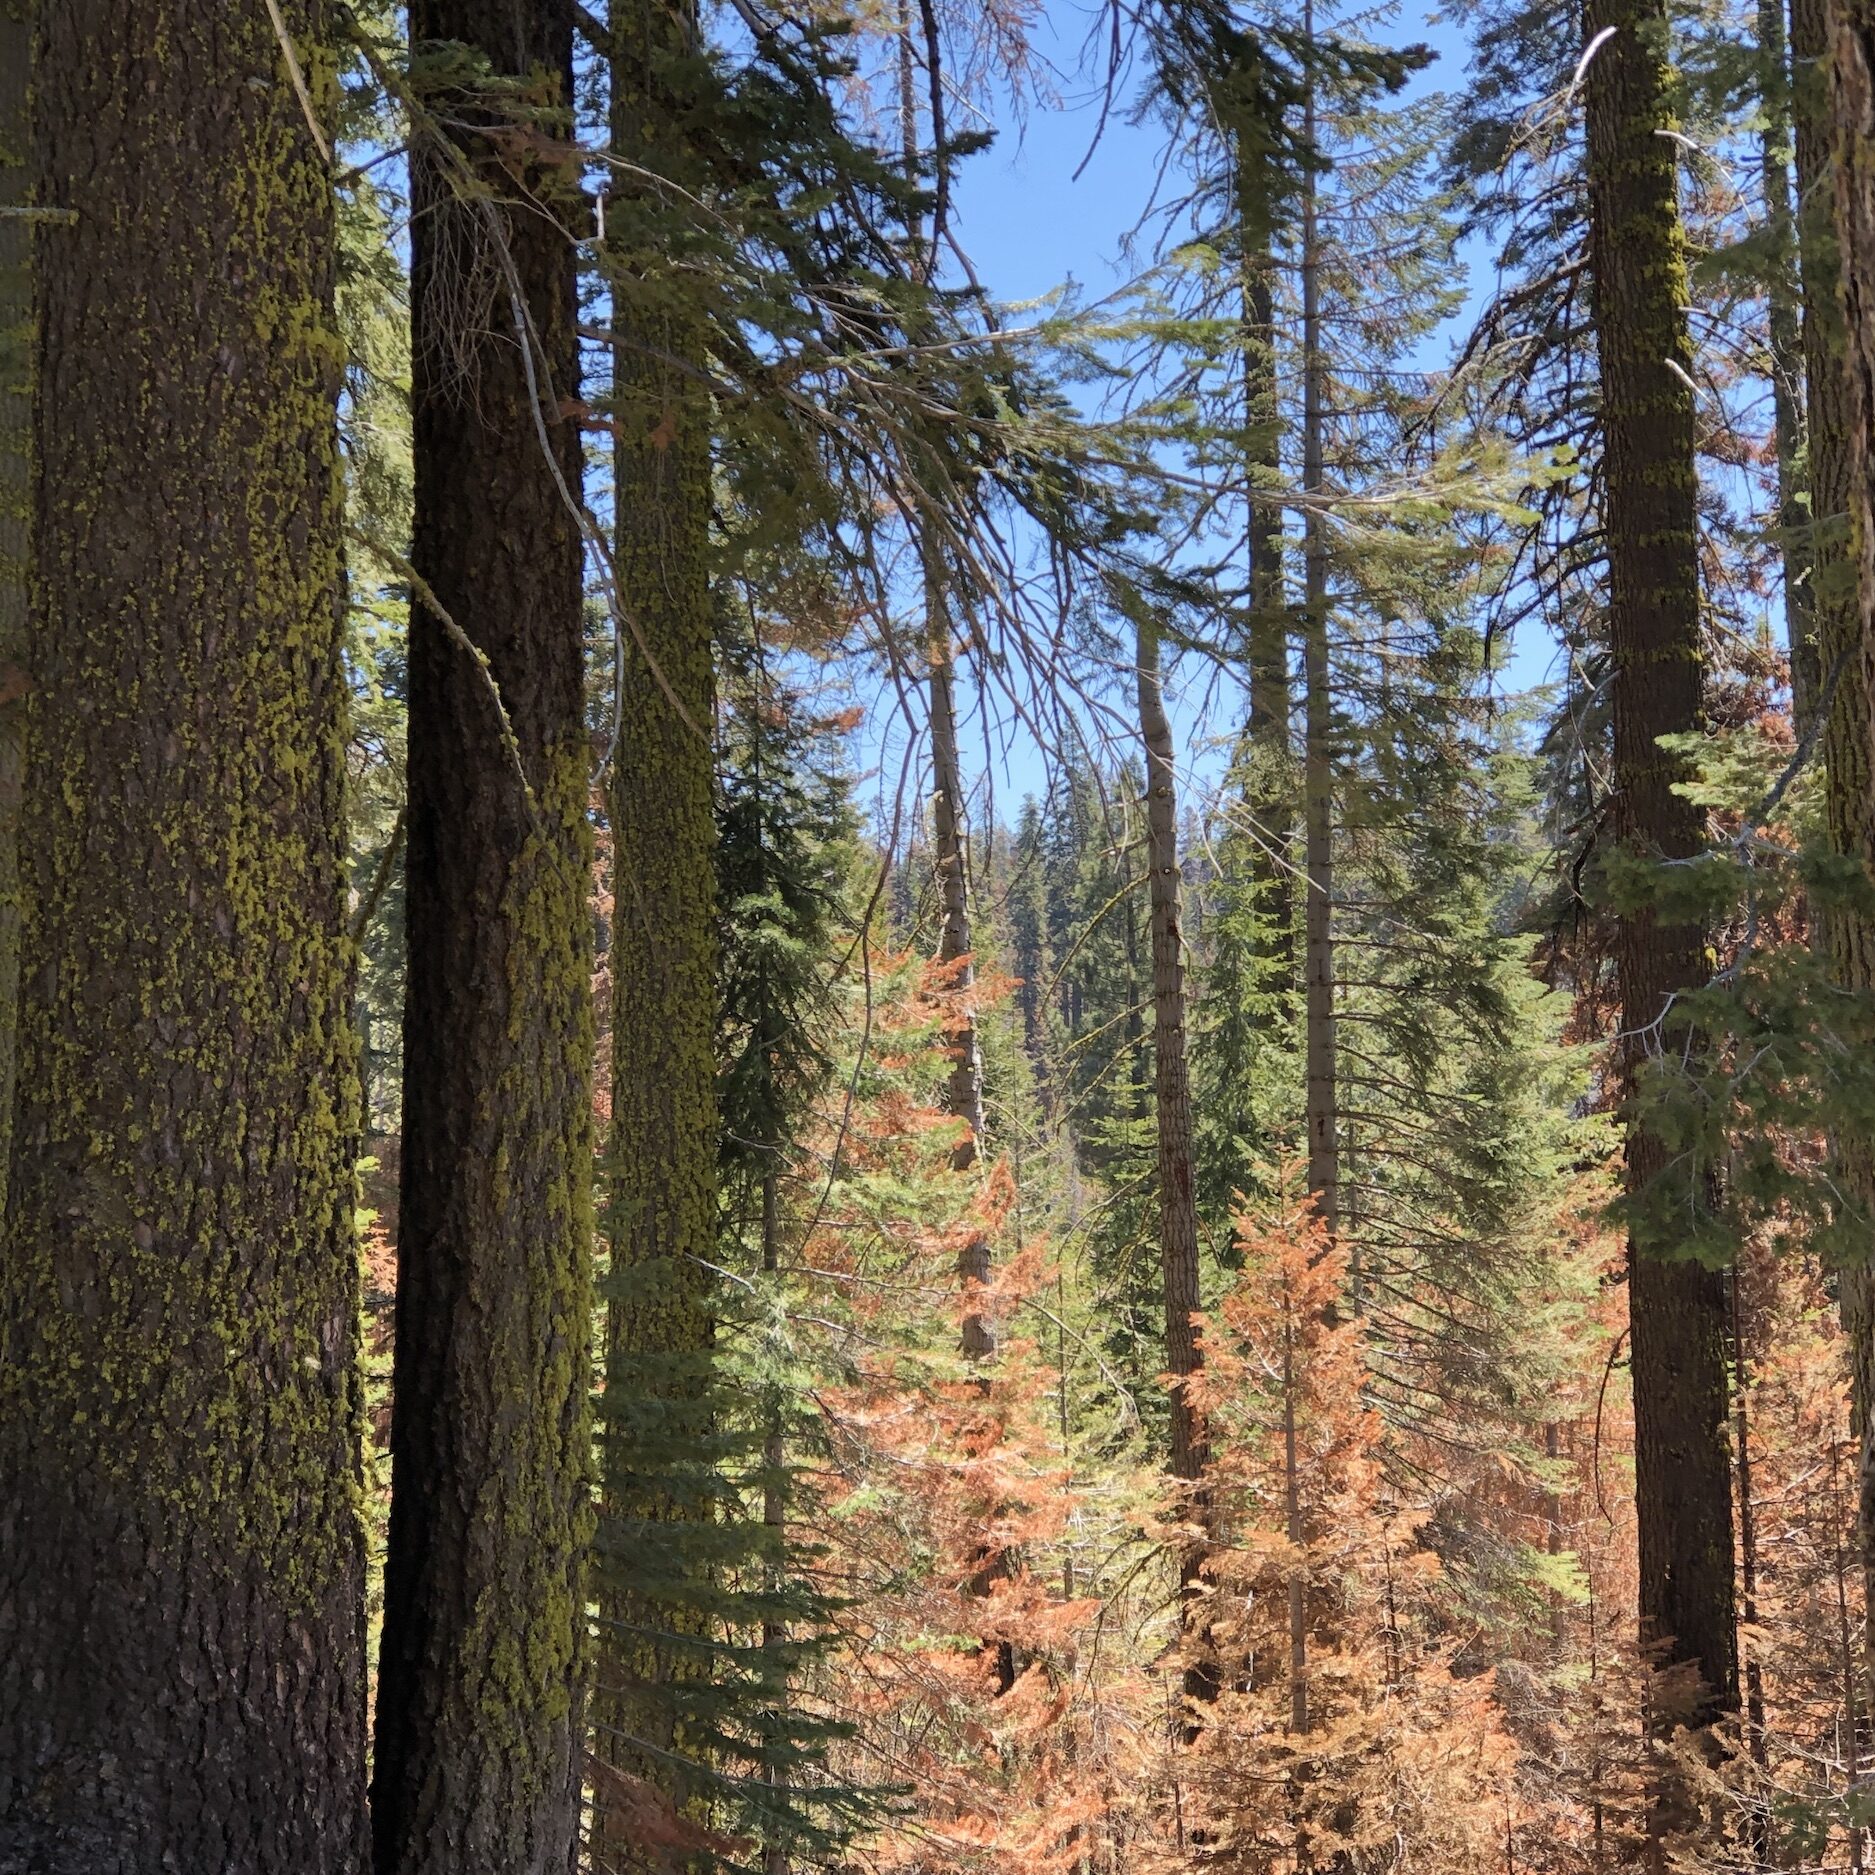 Dense, mature forest that burned lightly in the Creek fire of 2020, Sierra National Forest.